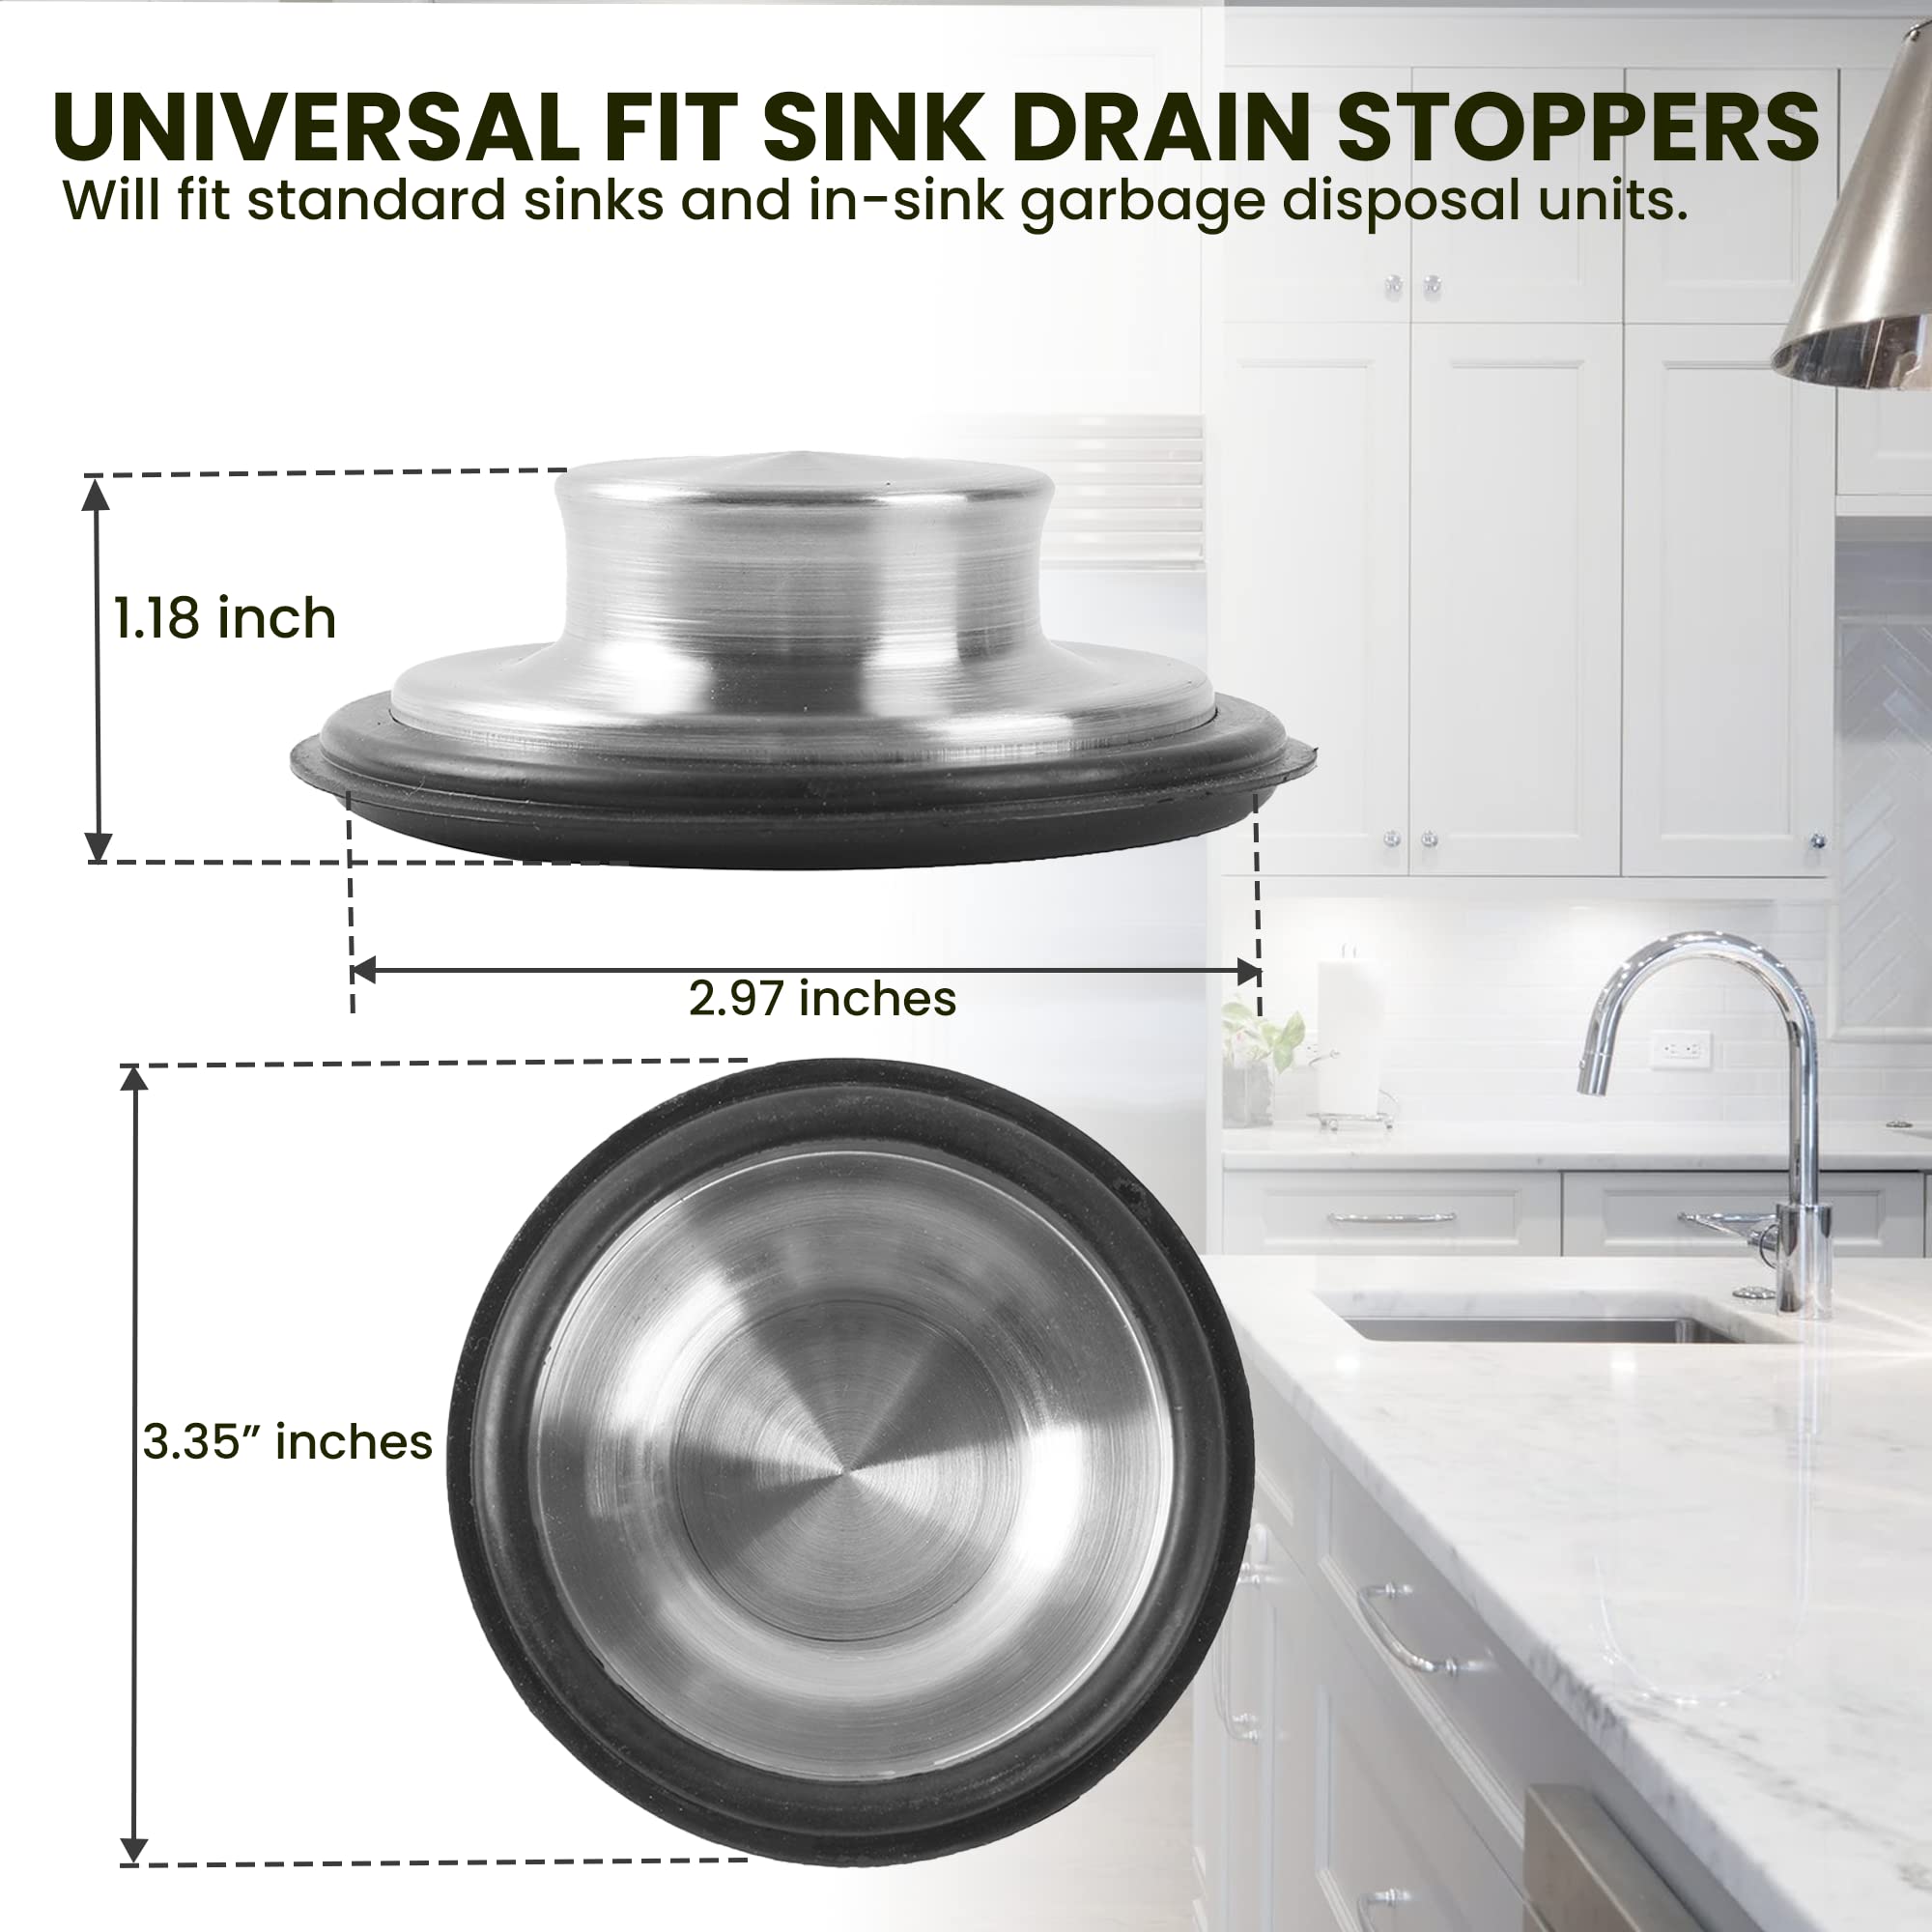 (2-Pack) Stainless Steel Kitchen Sink Stoppers - 3.35” x 1.18” Universal Fit Sink Drain Stoppers- with Strong Rubber Seal and Round Knob Grip - Suitable Replacement for InSinkErator STP-SS Stopper